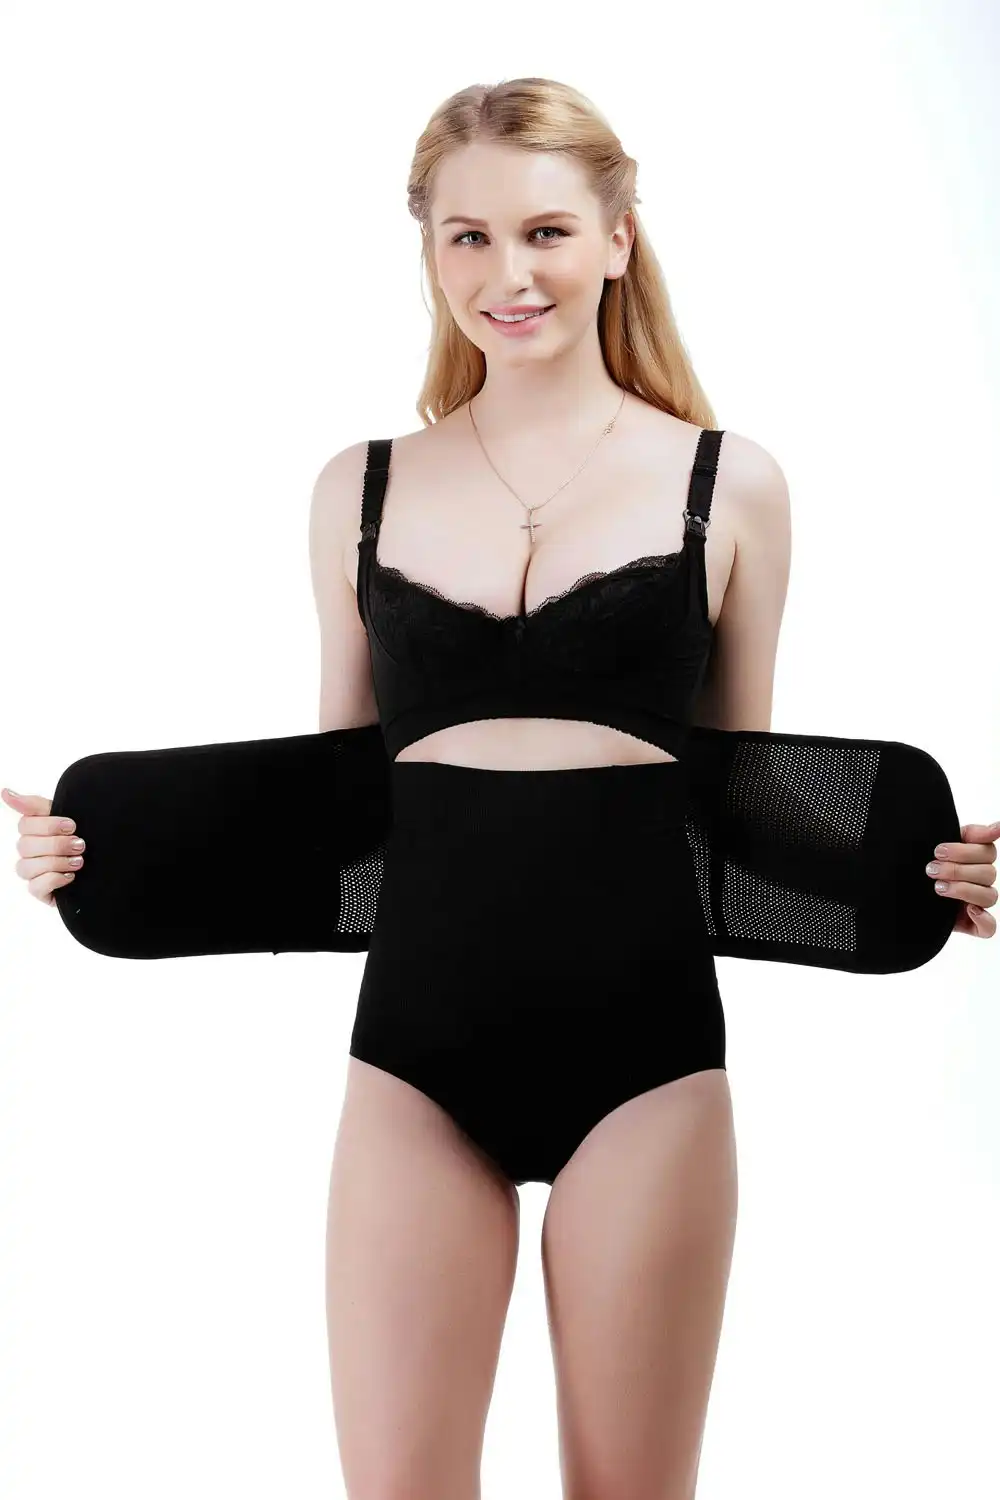 Double Compression Waist Trainer Compression Body Shaper Support Black - XL Extra Large